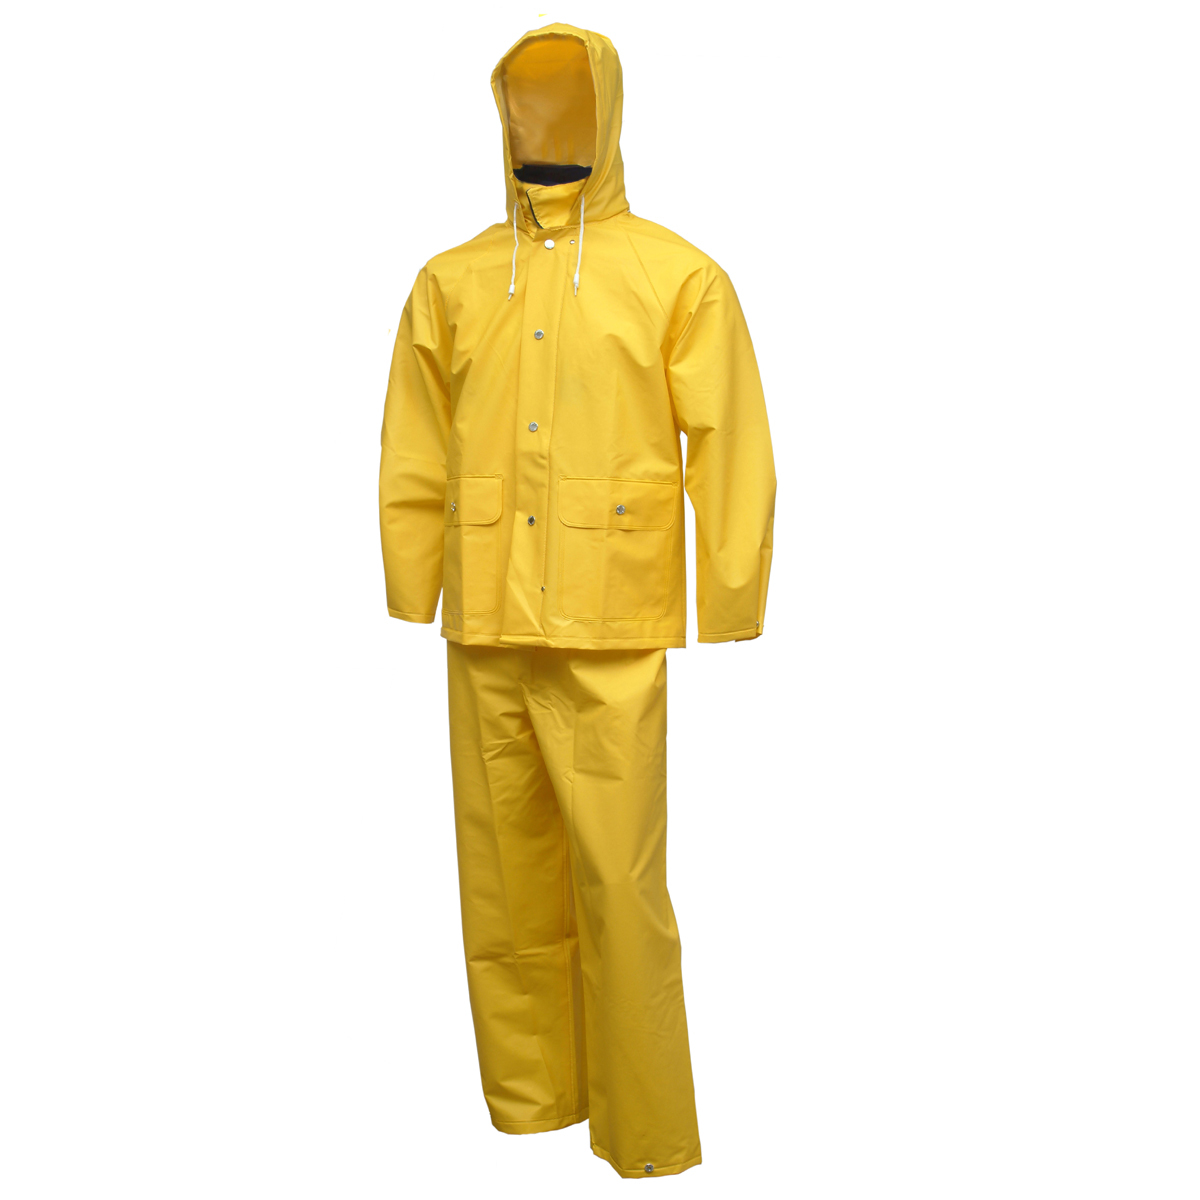 Tingley 3X Yellow Industrial Work .35 mm PVC And Polyester 3-Piece Rain Suit With Jacket, Hood And Overalls